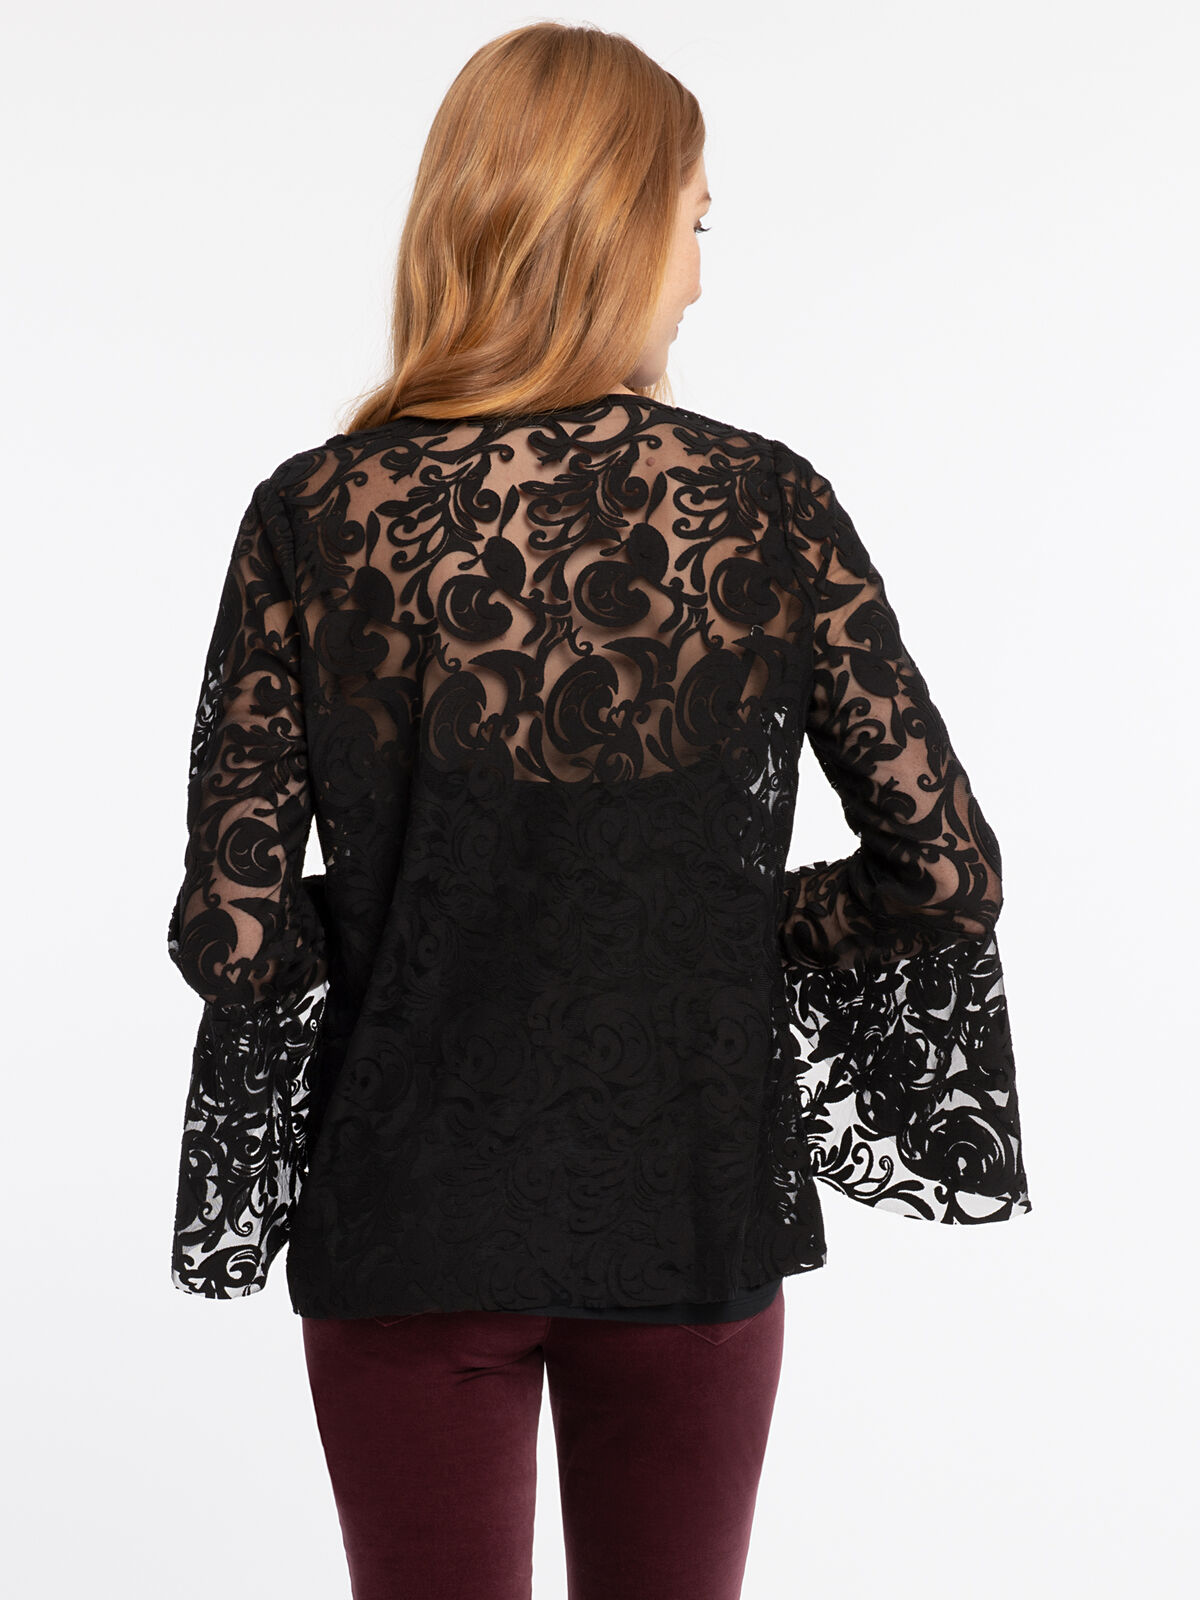 Lovely Lace Top